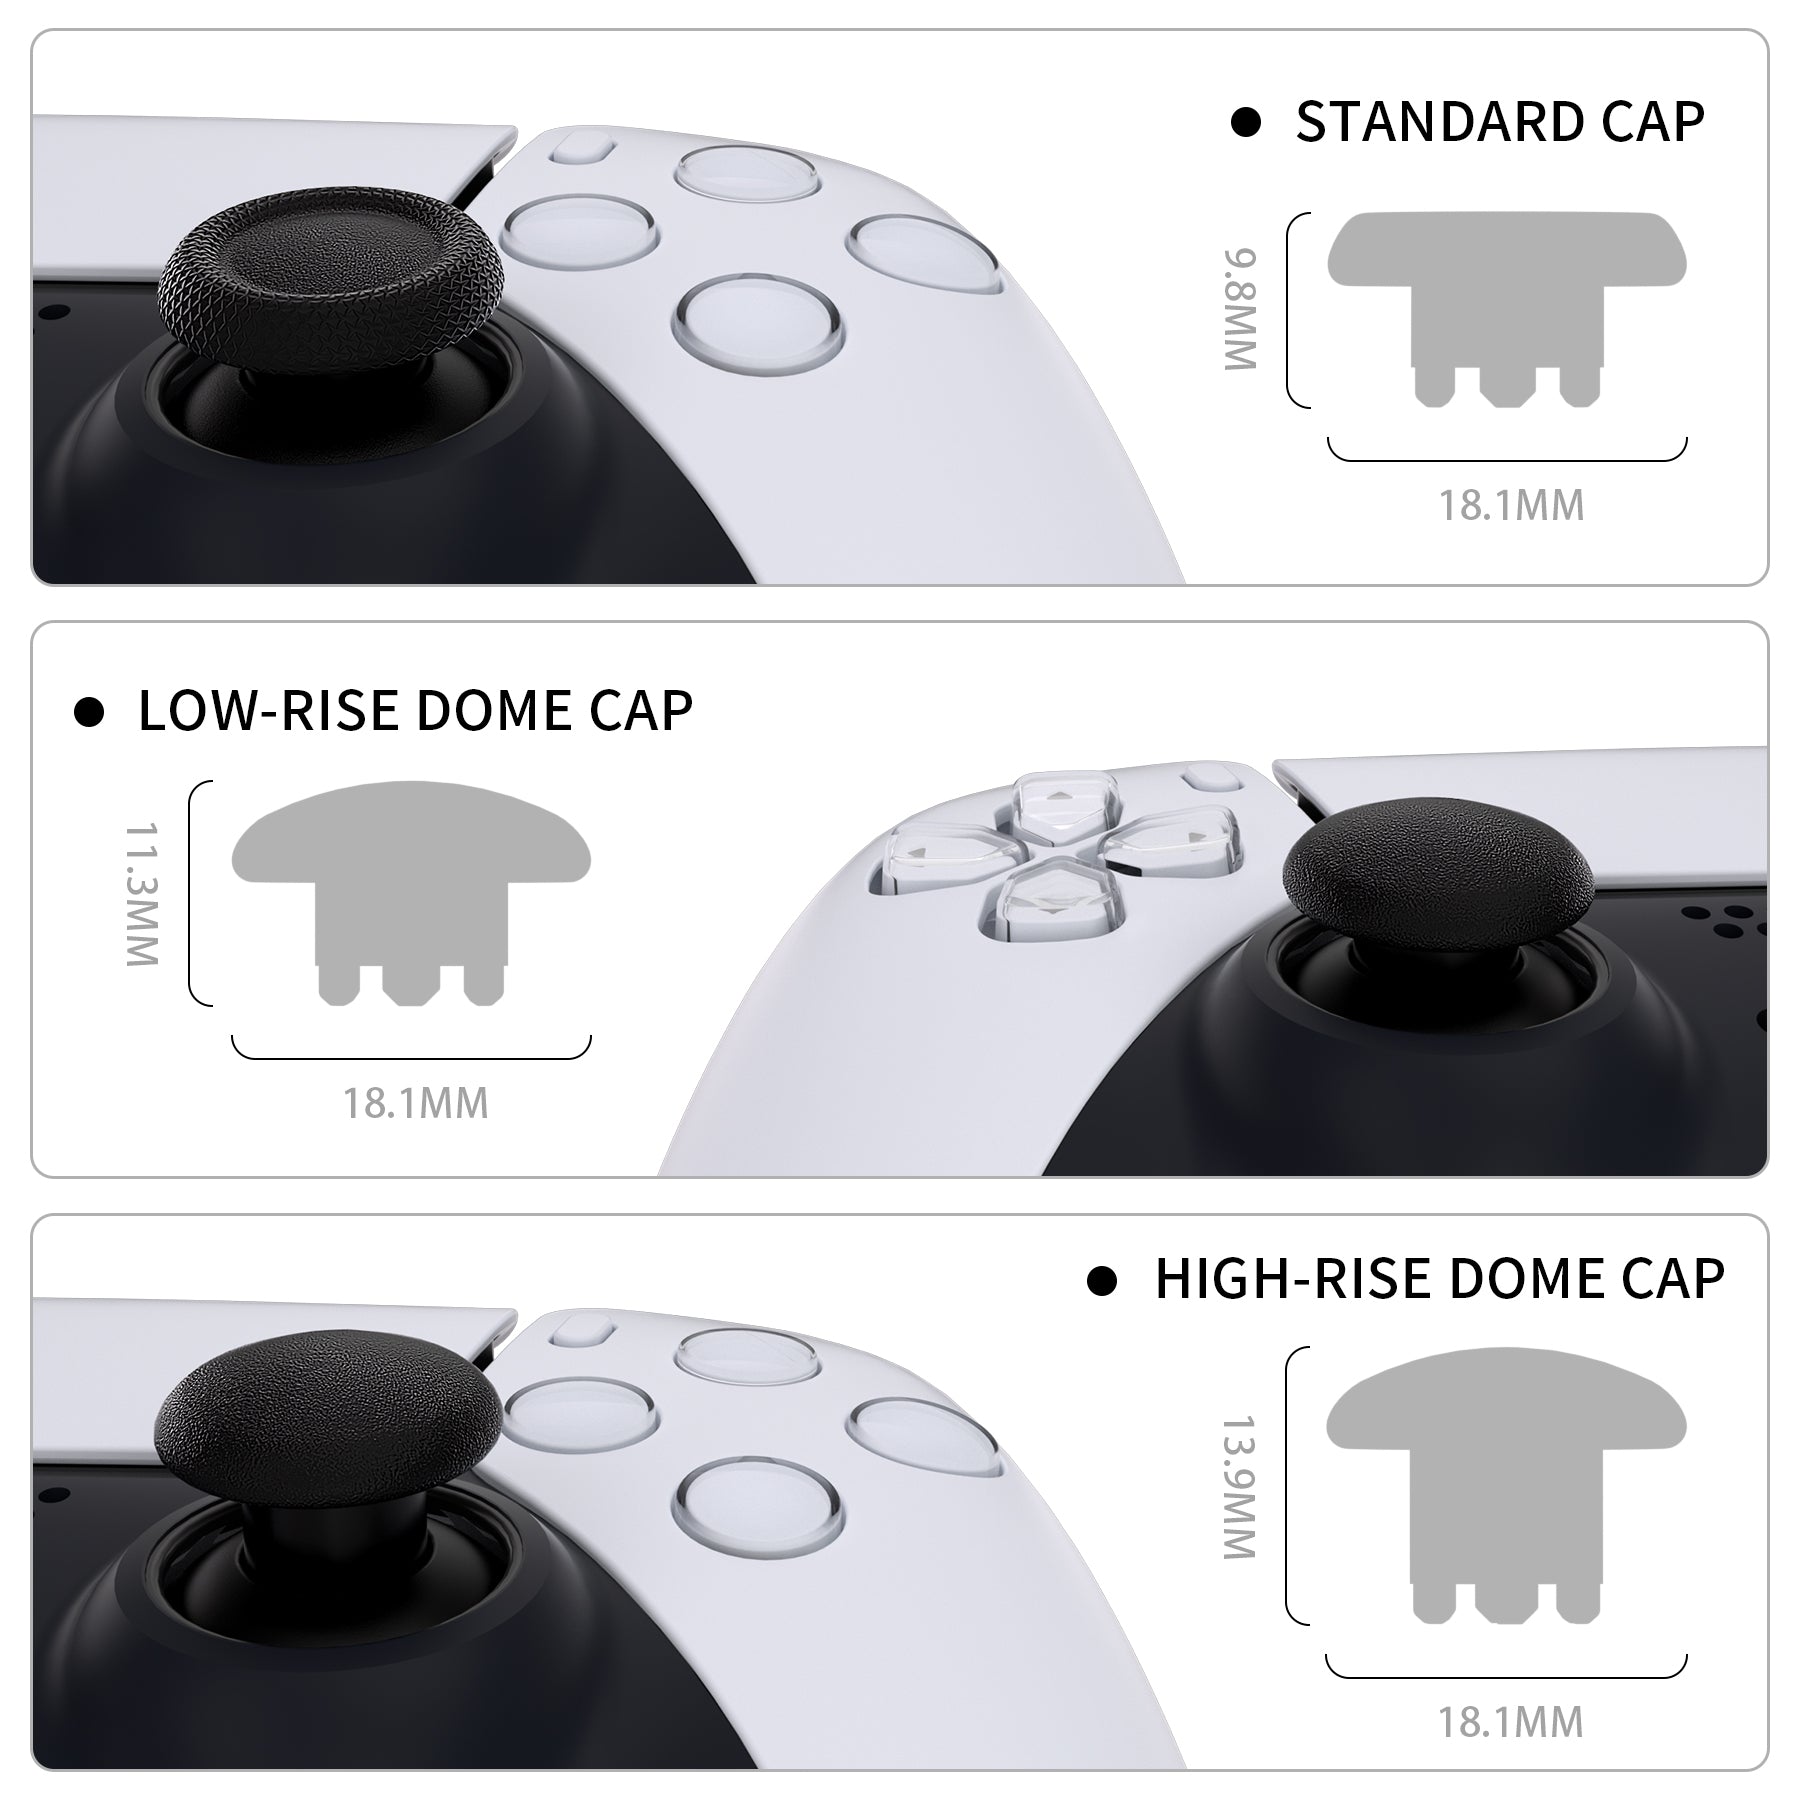 EDGE Sticks Replacement Interchangeable Thumbsticks for PS5 & PS4 All Model Controllers - Black eXtremeRate